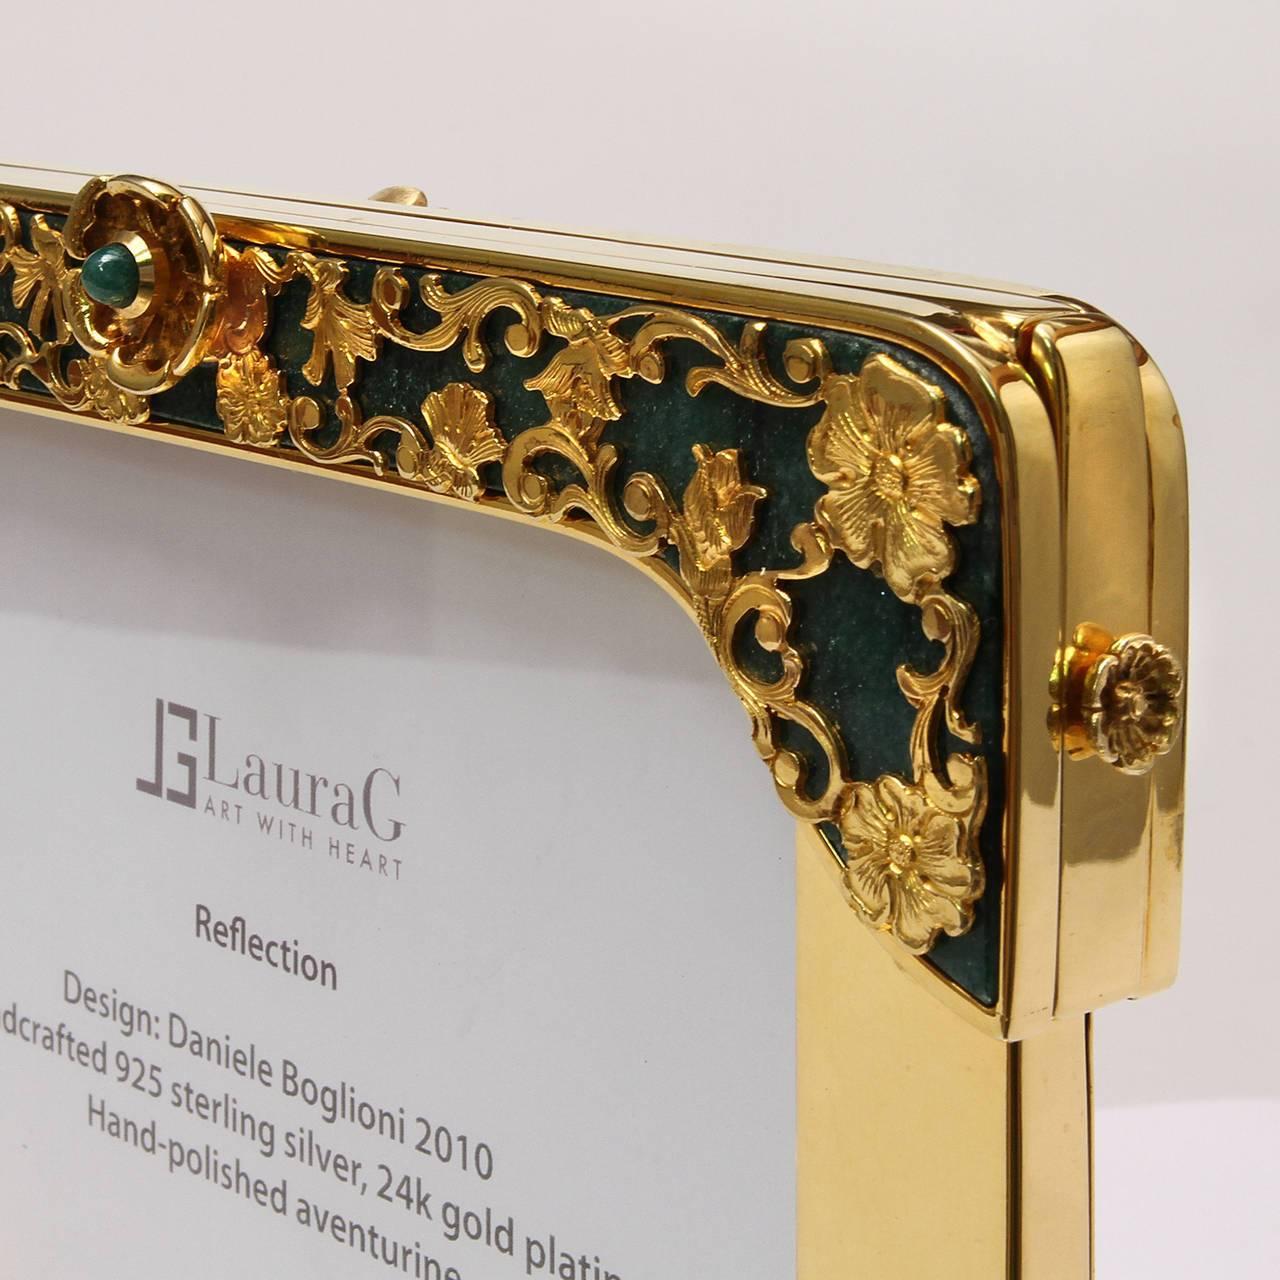 Reflection is gilded silver floral double photo frame with aventurine stone, a jewel photo frame signed Laura G Art with Heart. It is handcrafted in 925 sterling silver golden and it is a top piece of the collection Art with Heart.Delicately  formed